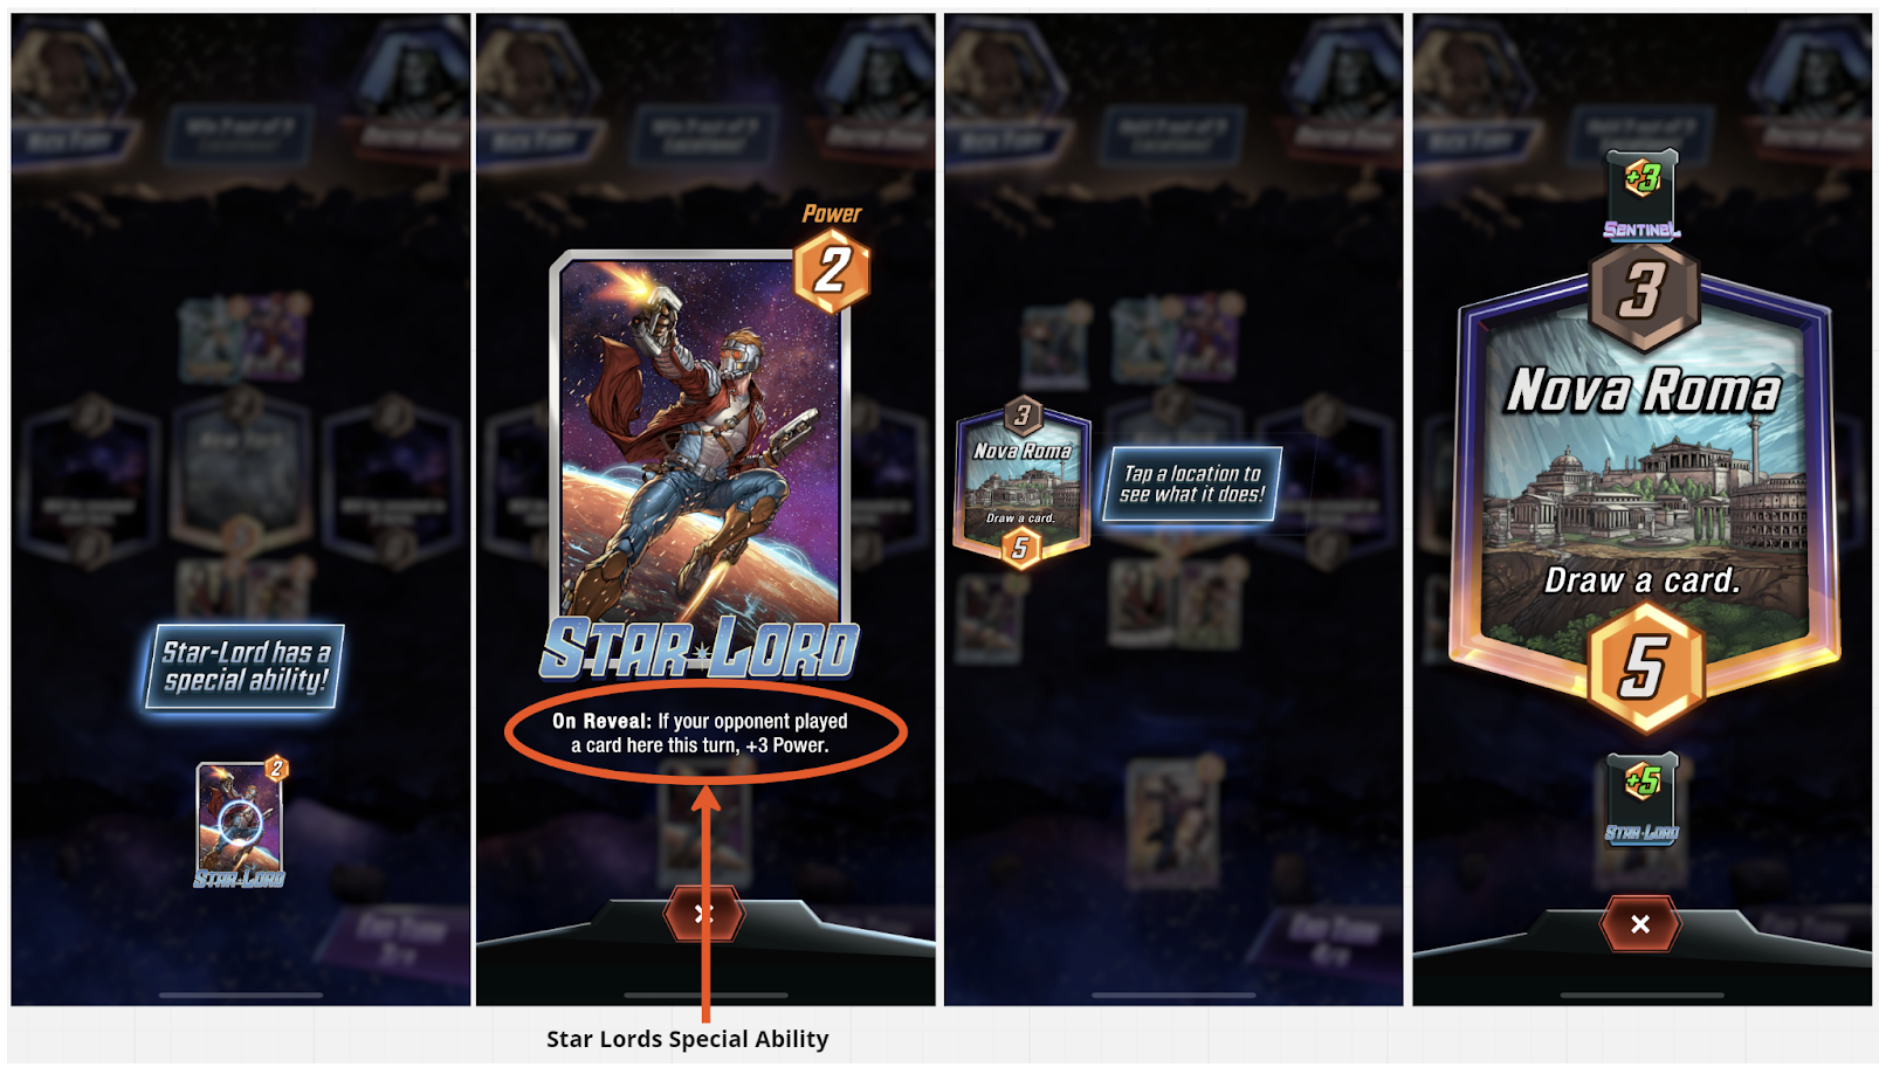 Marvel Snap is a perfectly balanced trading card game